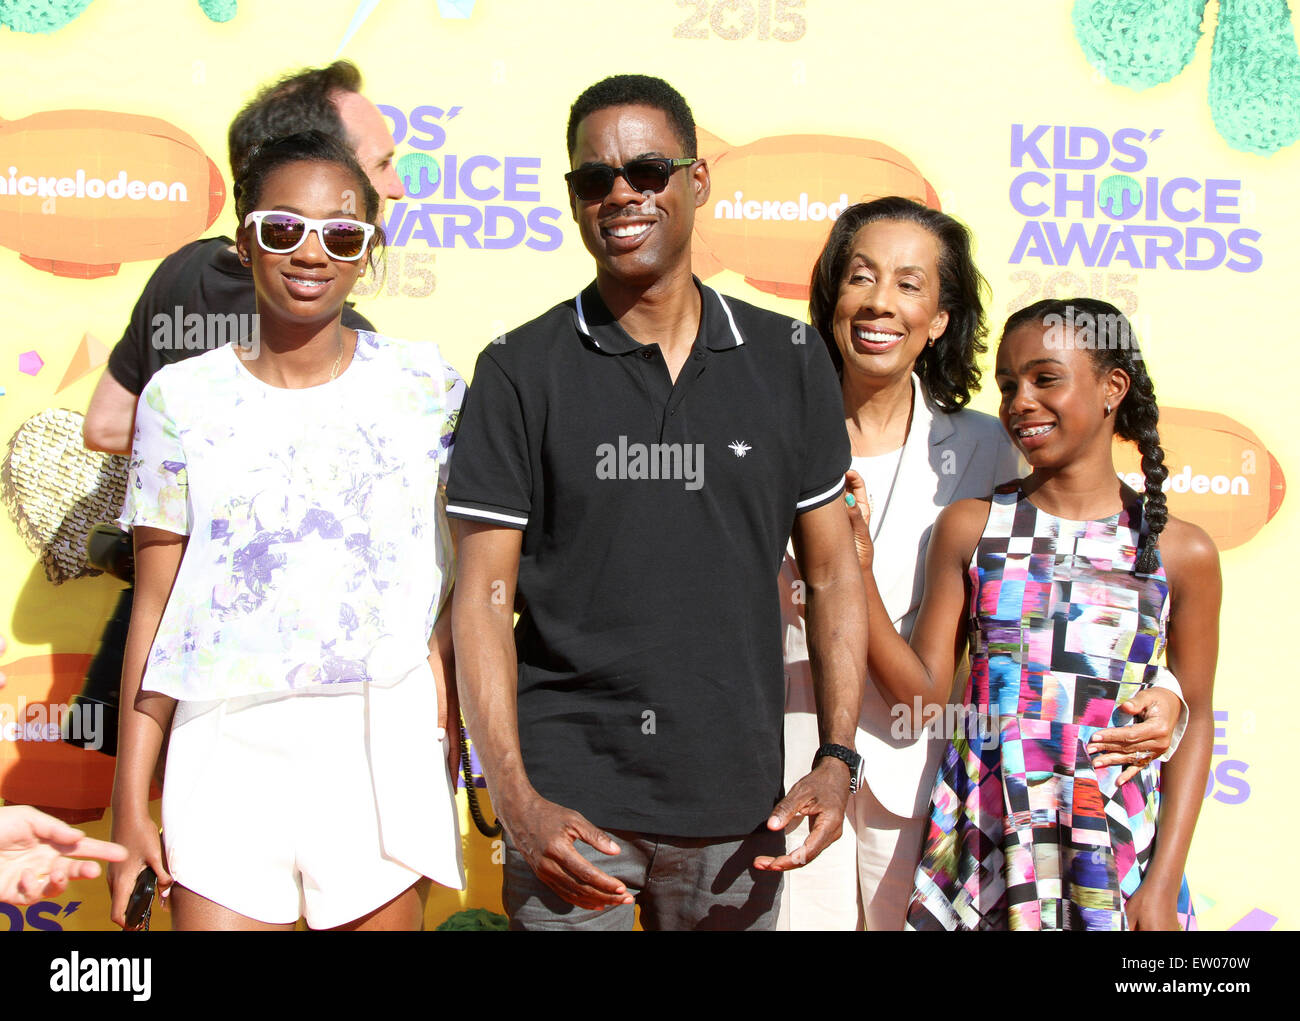 Chris rock and lola simone hi-res stock photography and images - Alamy